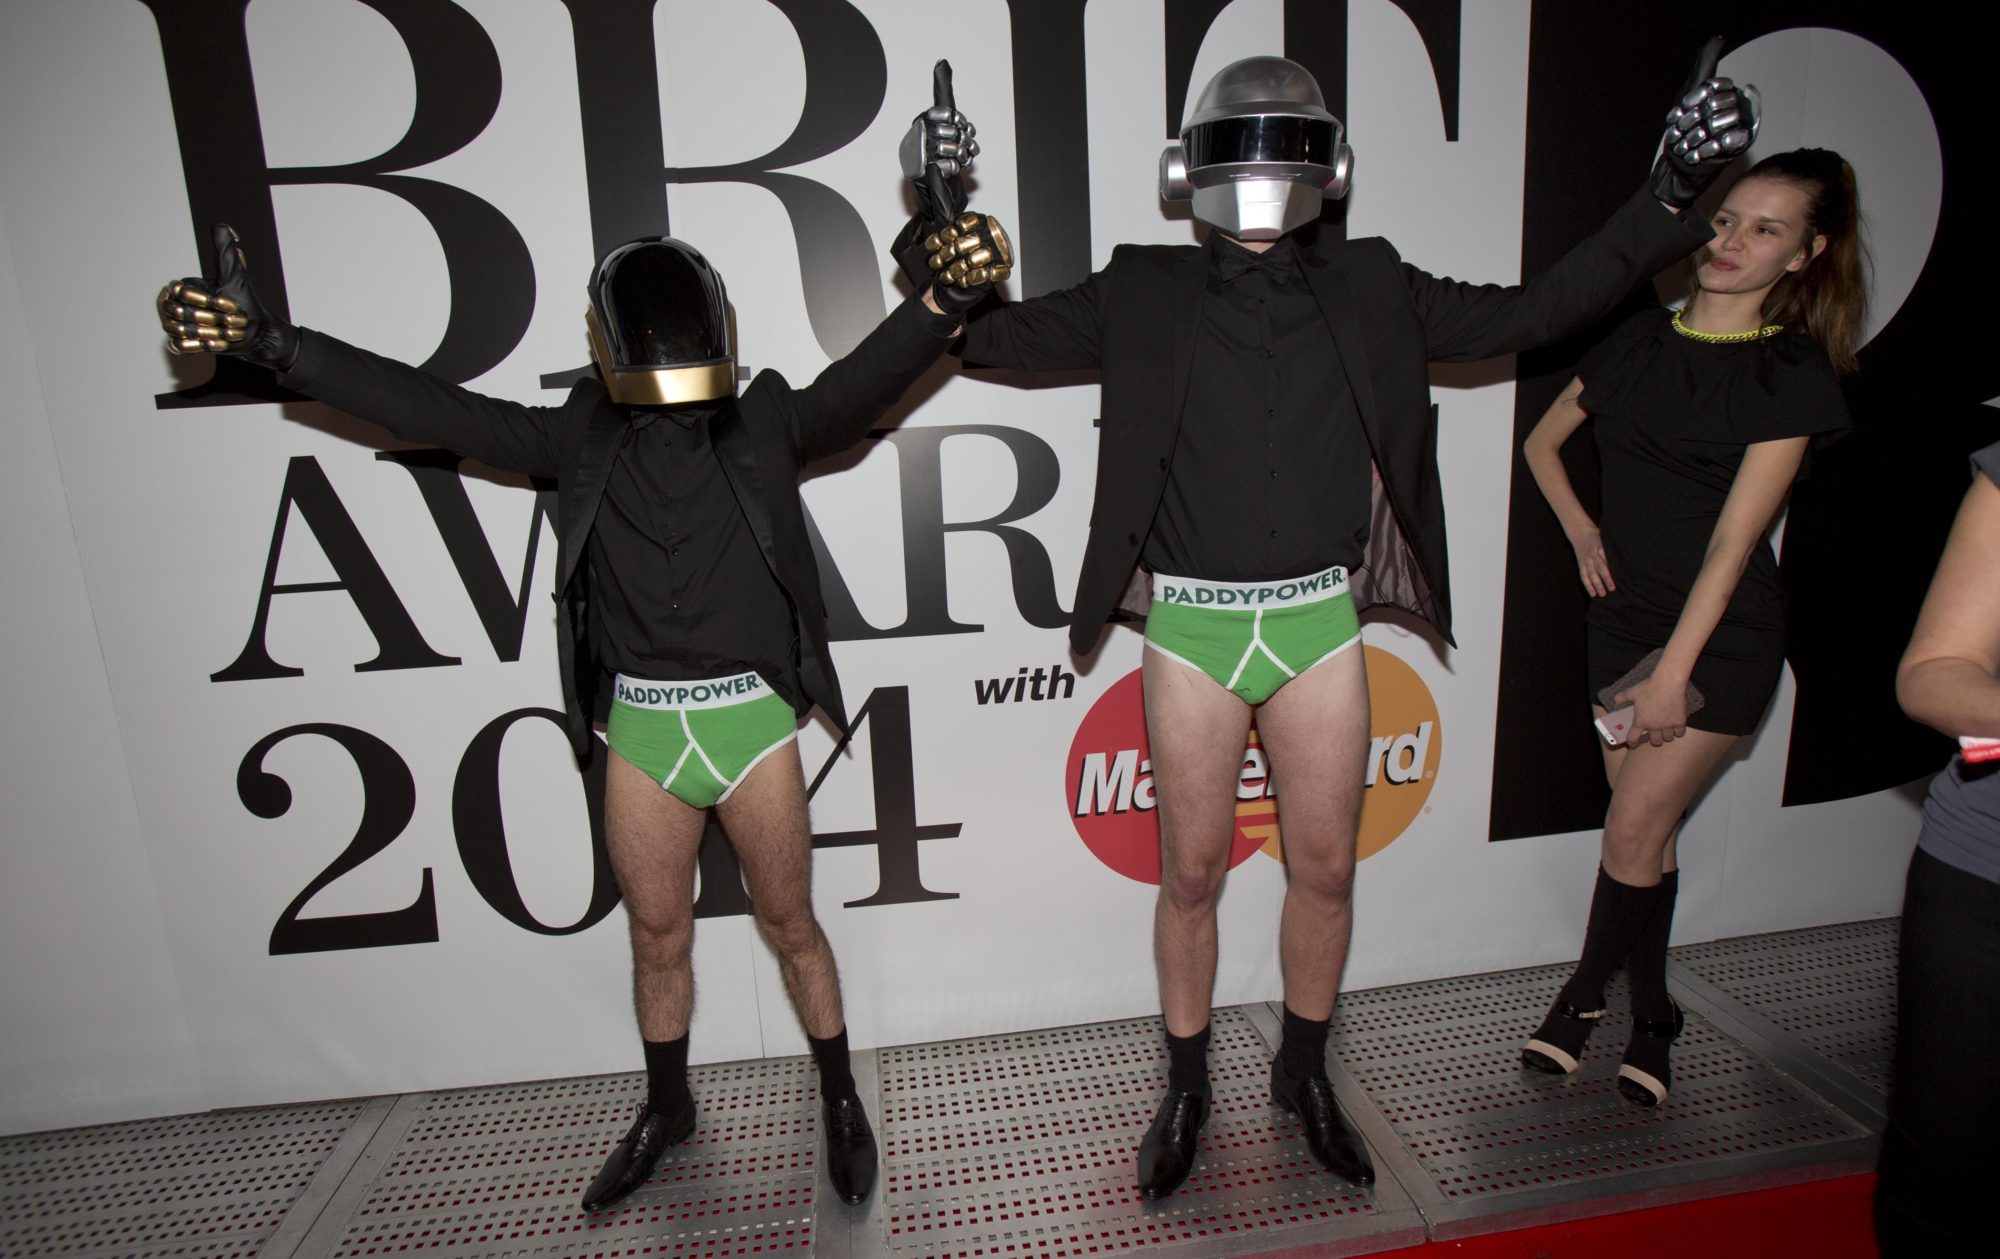 Bookmakers Paddy Power caused a sensation on the Brit Awards red carpet tonight with their very own Daft Punk lookalikes who, after mingling with pop royalty , surprised onlookers by whipping off their trousers Chippendale style to reveal a fetching pair of Paddy Power’s world famous Lucky Pants. 19.2.14 Pix.Tim Anderson